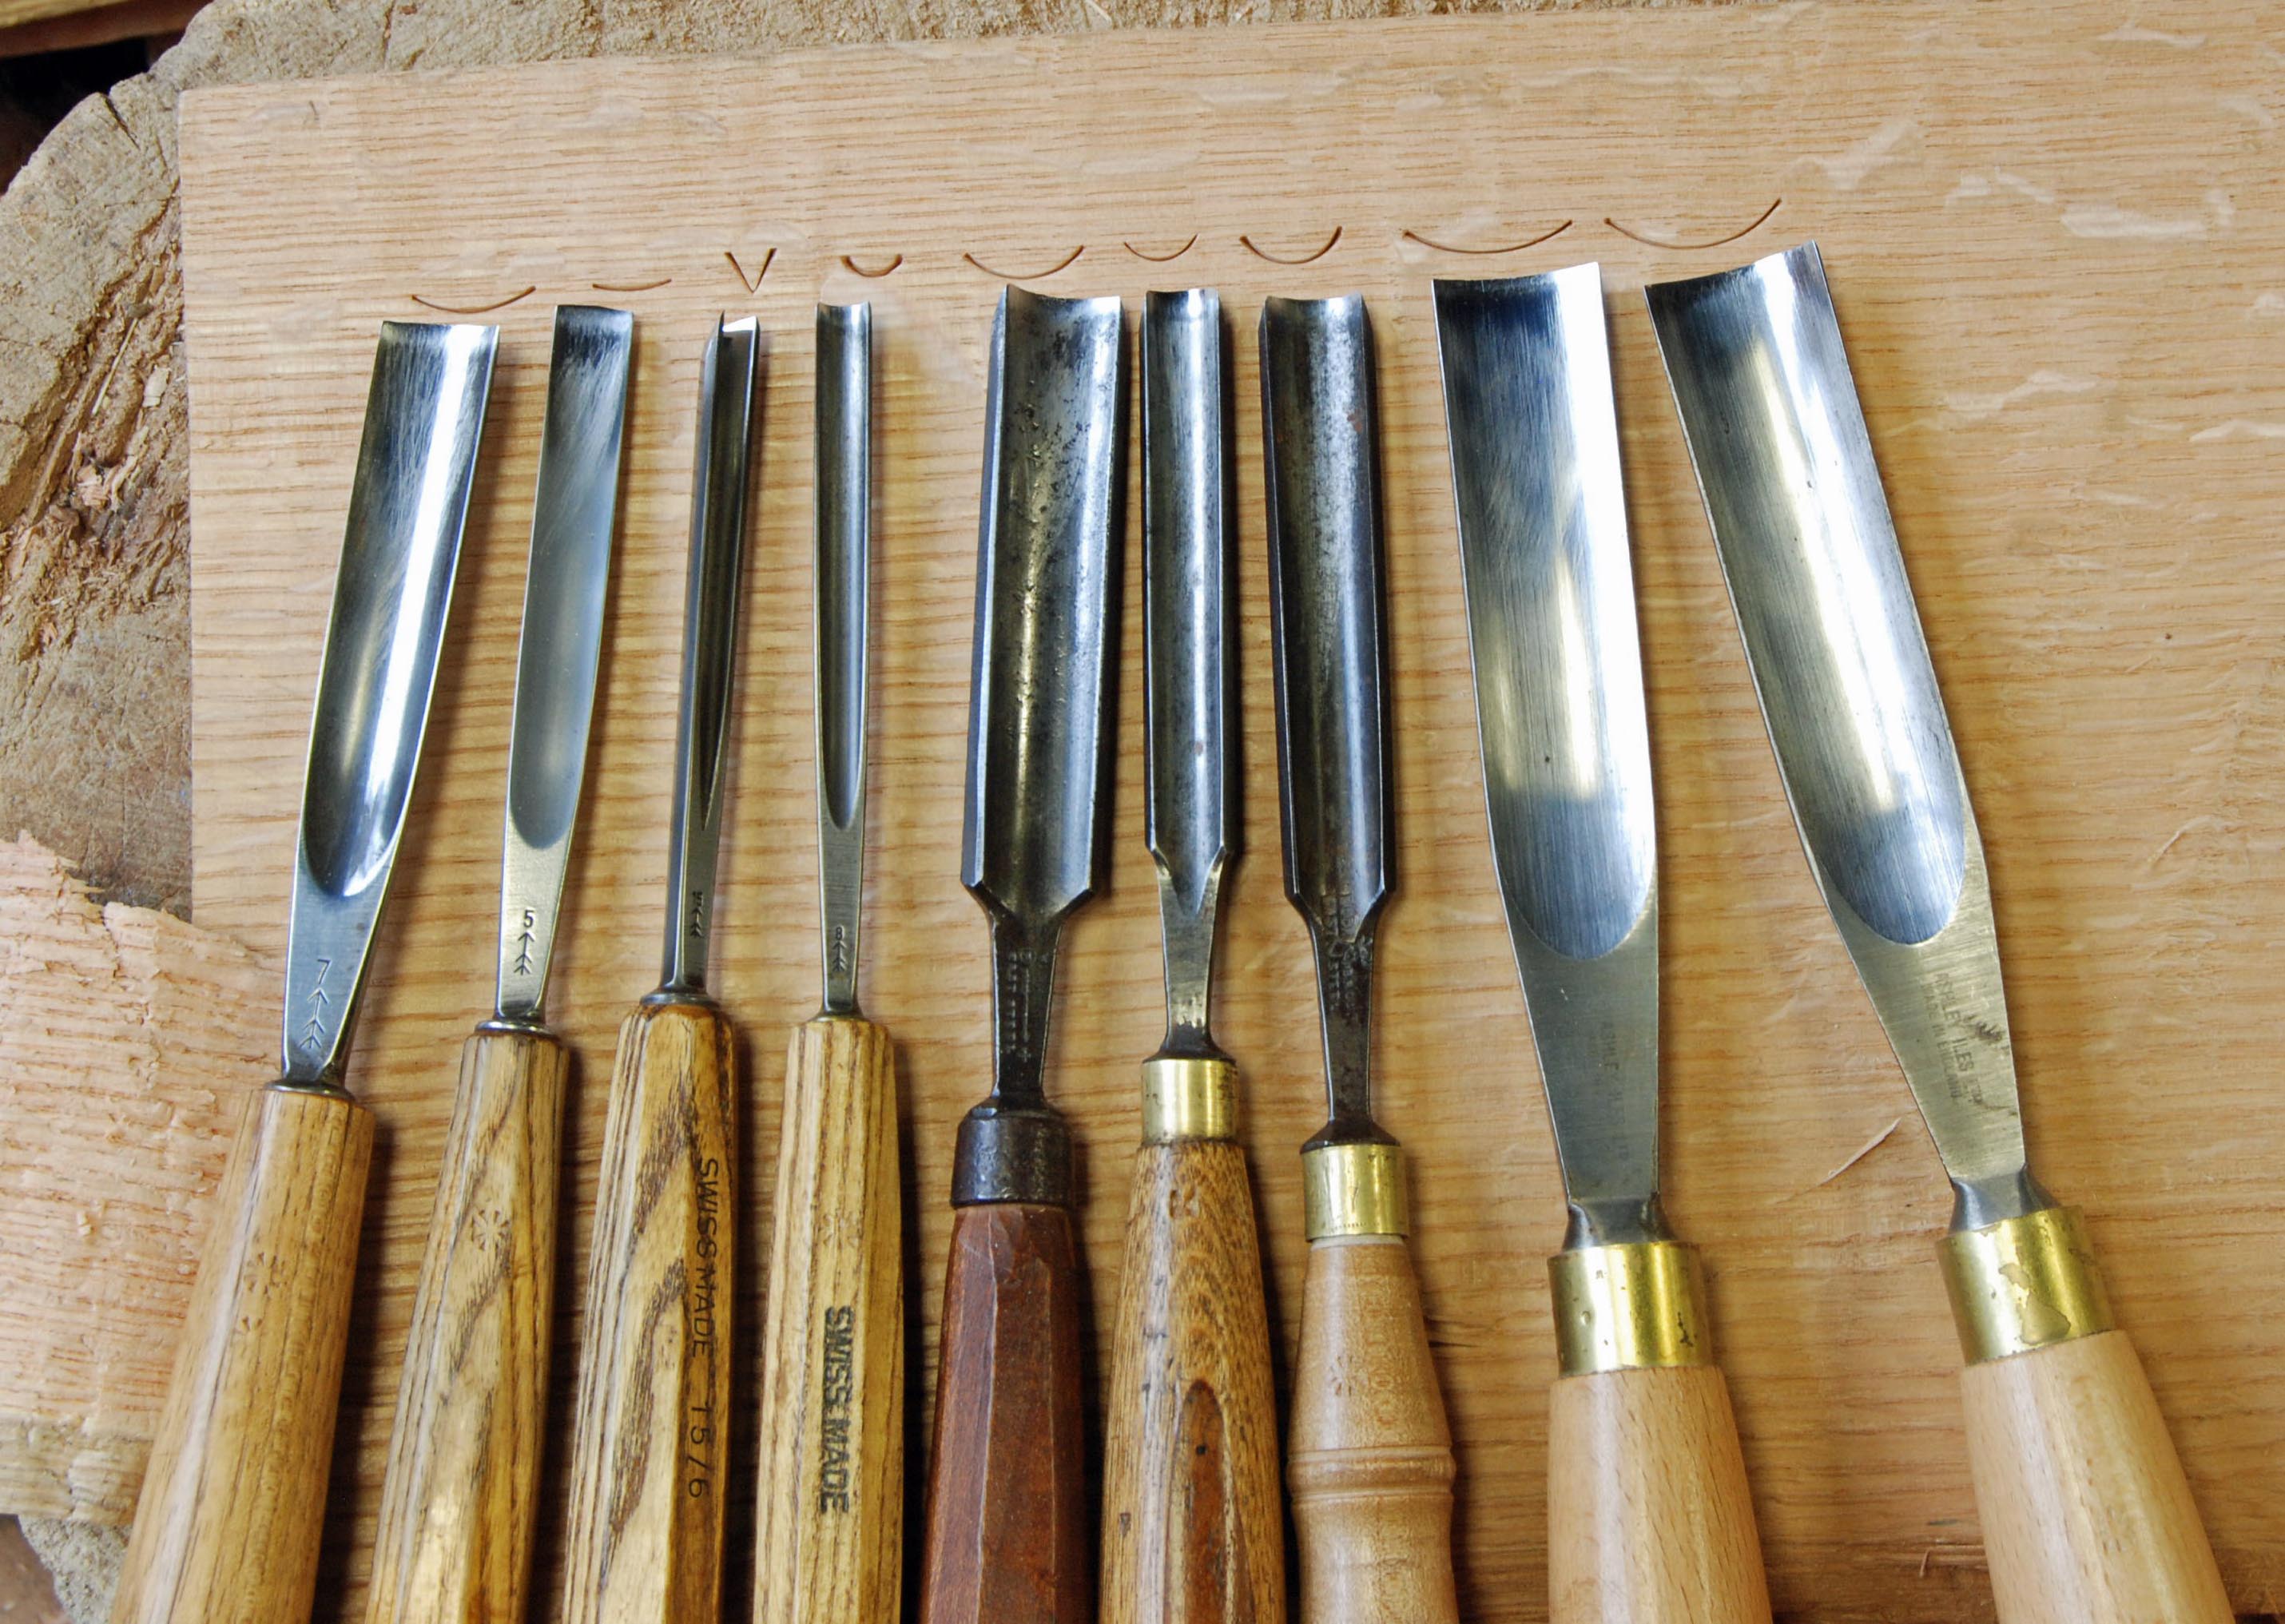 Woodworking chisels uk